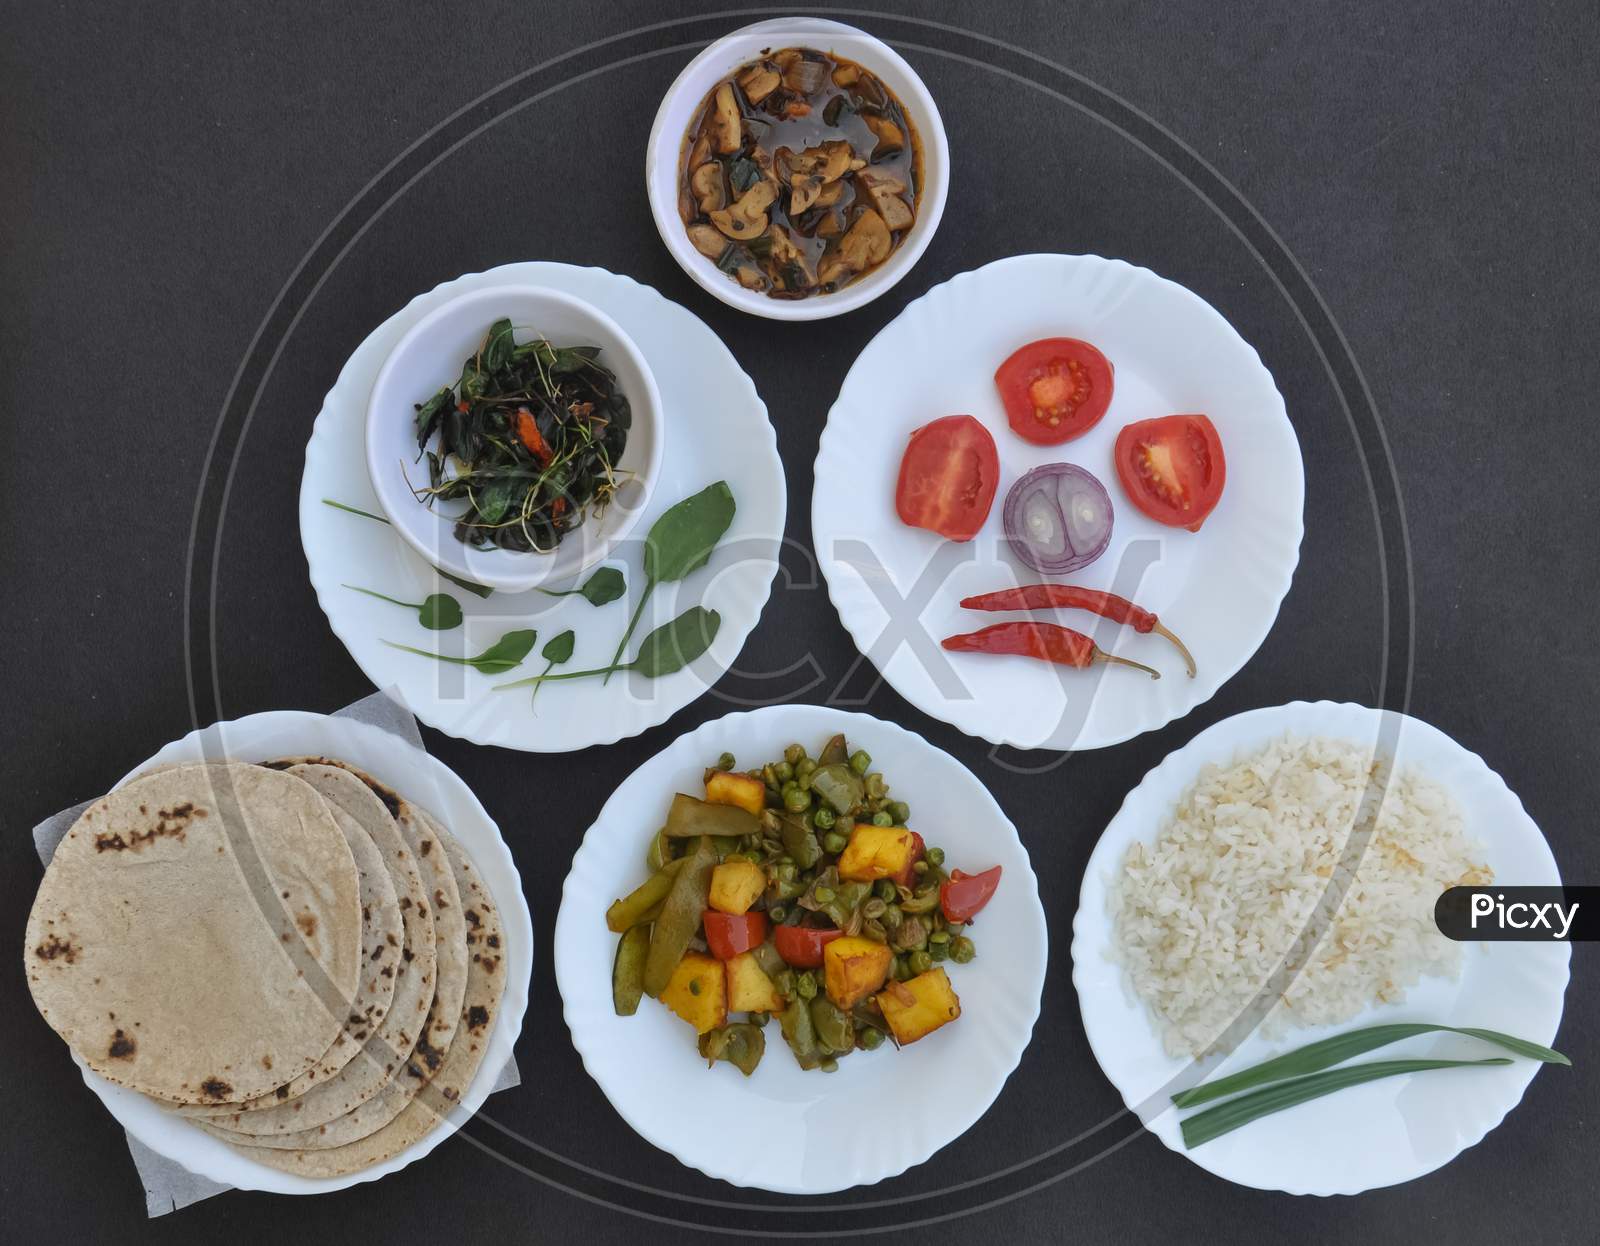 Indian Food - High angle view of mushroom soup, saag (greens), salad, roti (Indian bread), matar paneer mix veg and chawal (rice) in white plates over black background